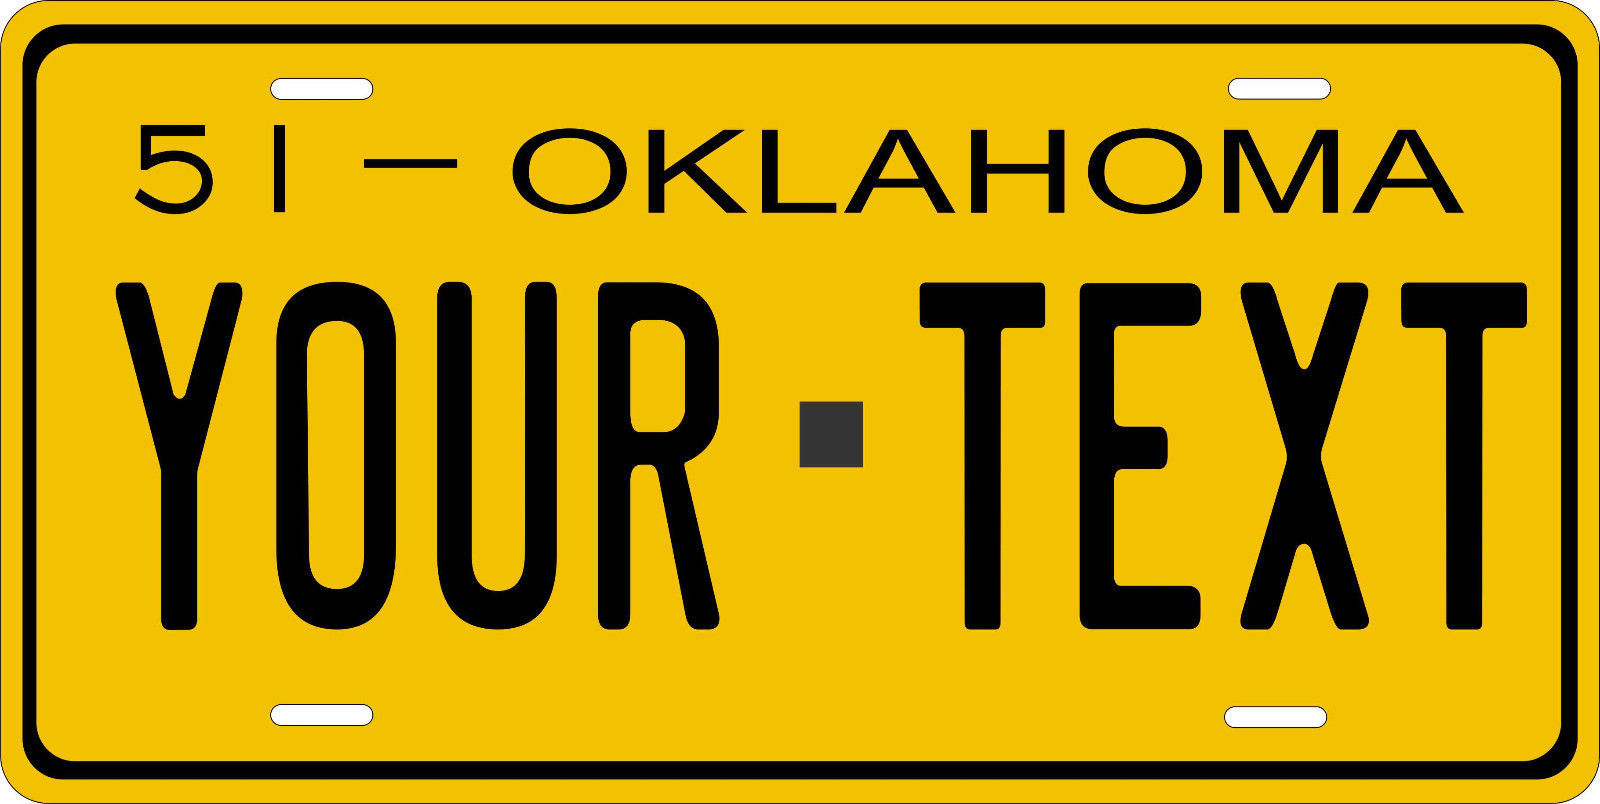 Oklahoma 1951 License Plate Personalized Custom Auto Bike Motorcycle Moped  - $10.99 - $18.22